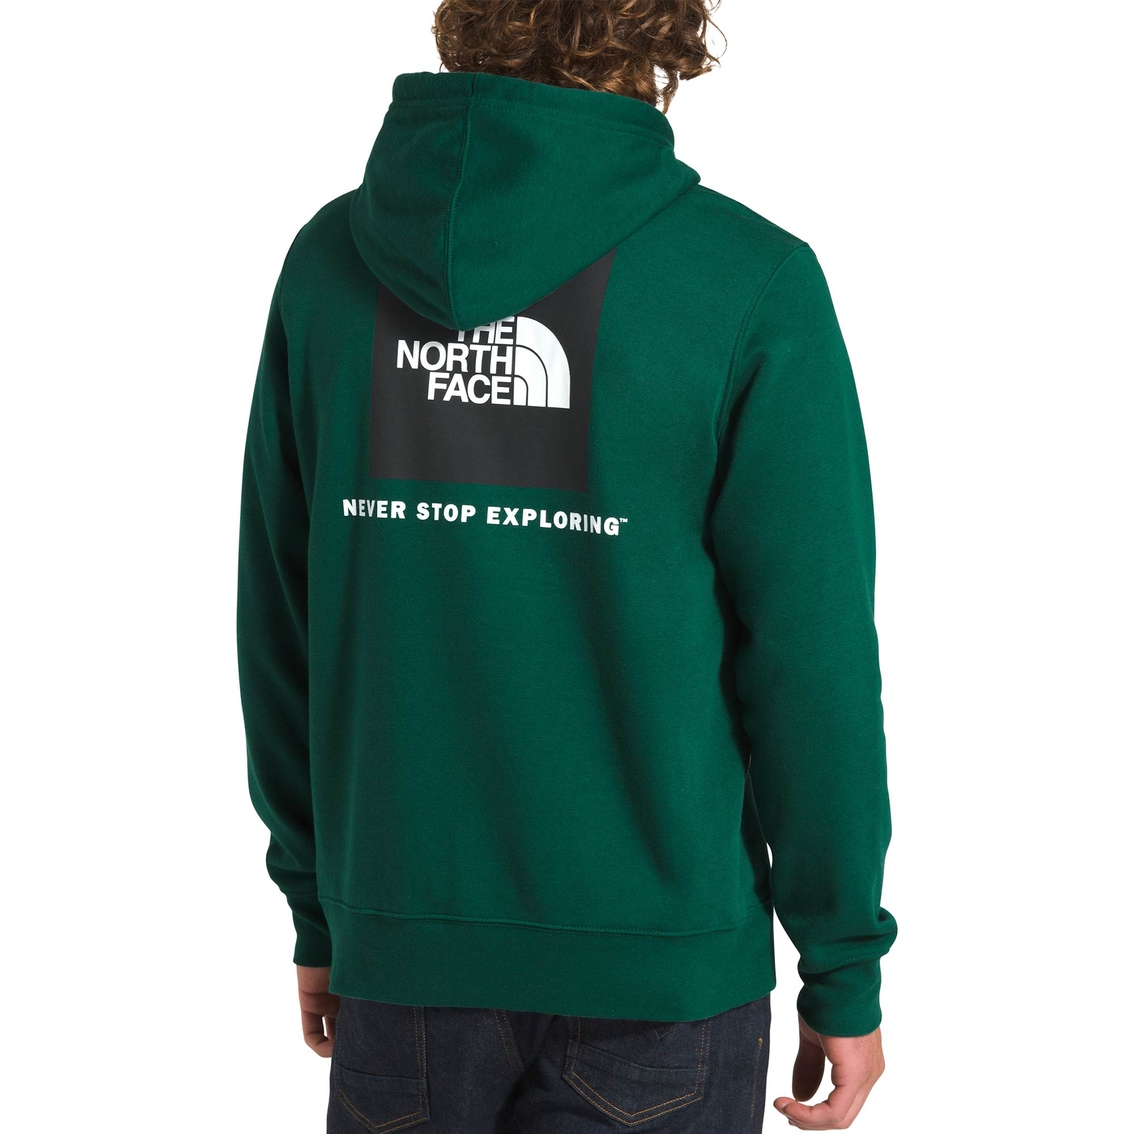 The North Face Men's Red Box Pullover Hoodie - Image 2 of 4